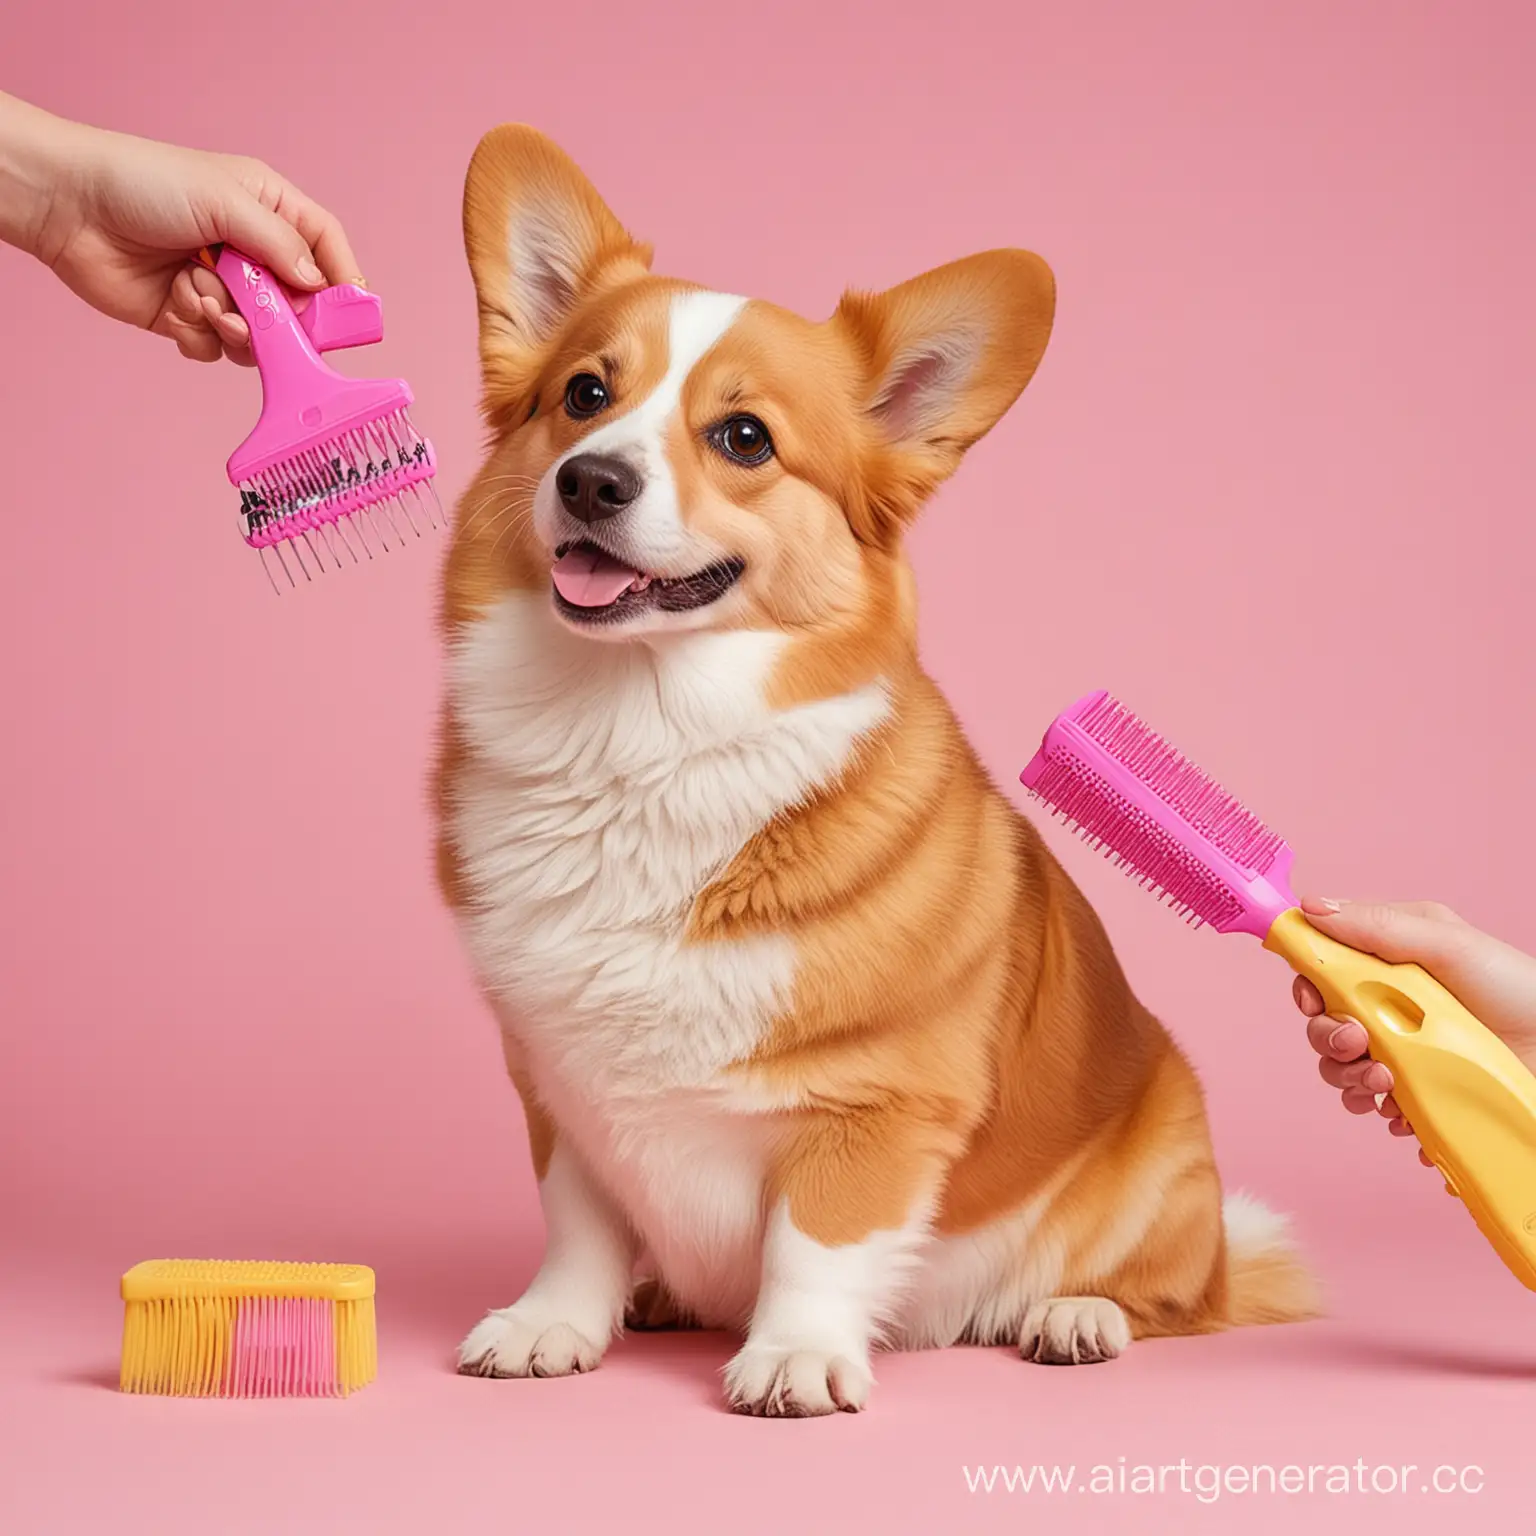 Professional-Corgi-Grooming-Session-with-Korg-and-Groomer